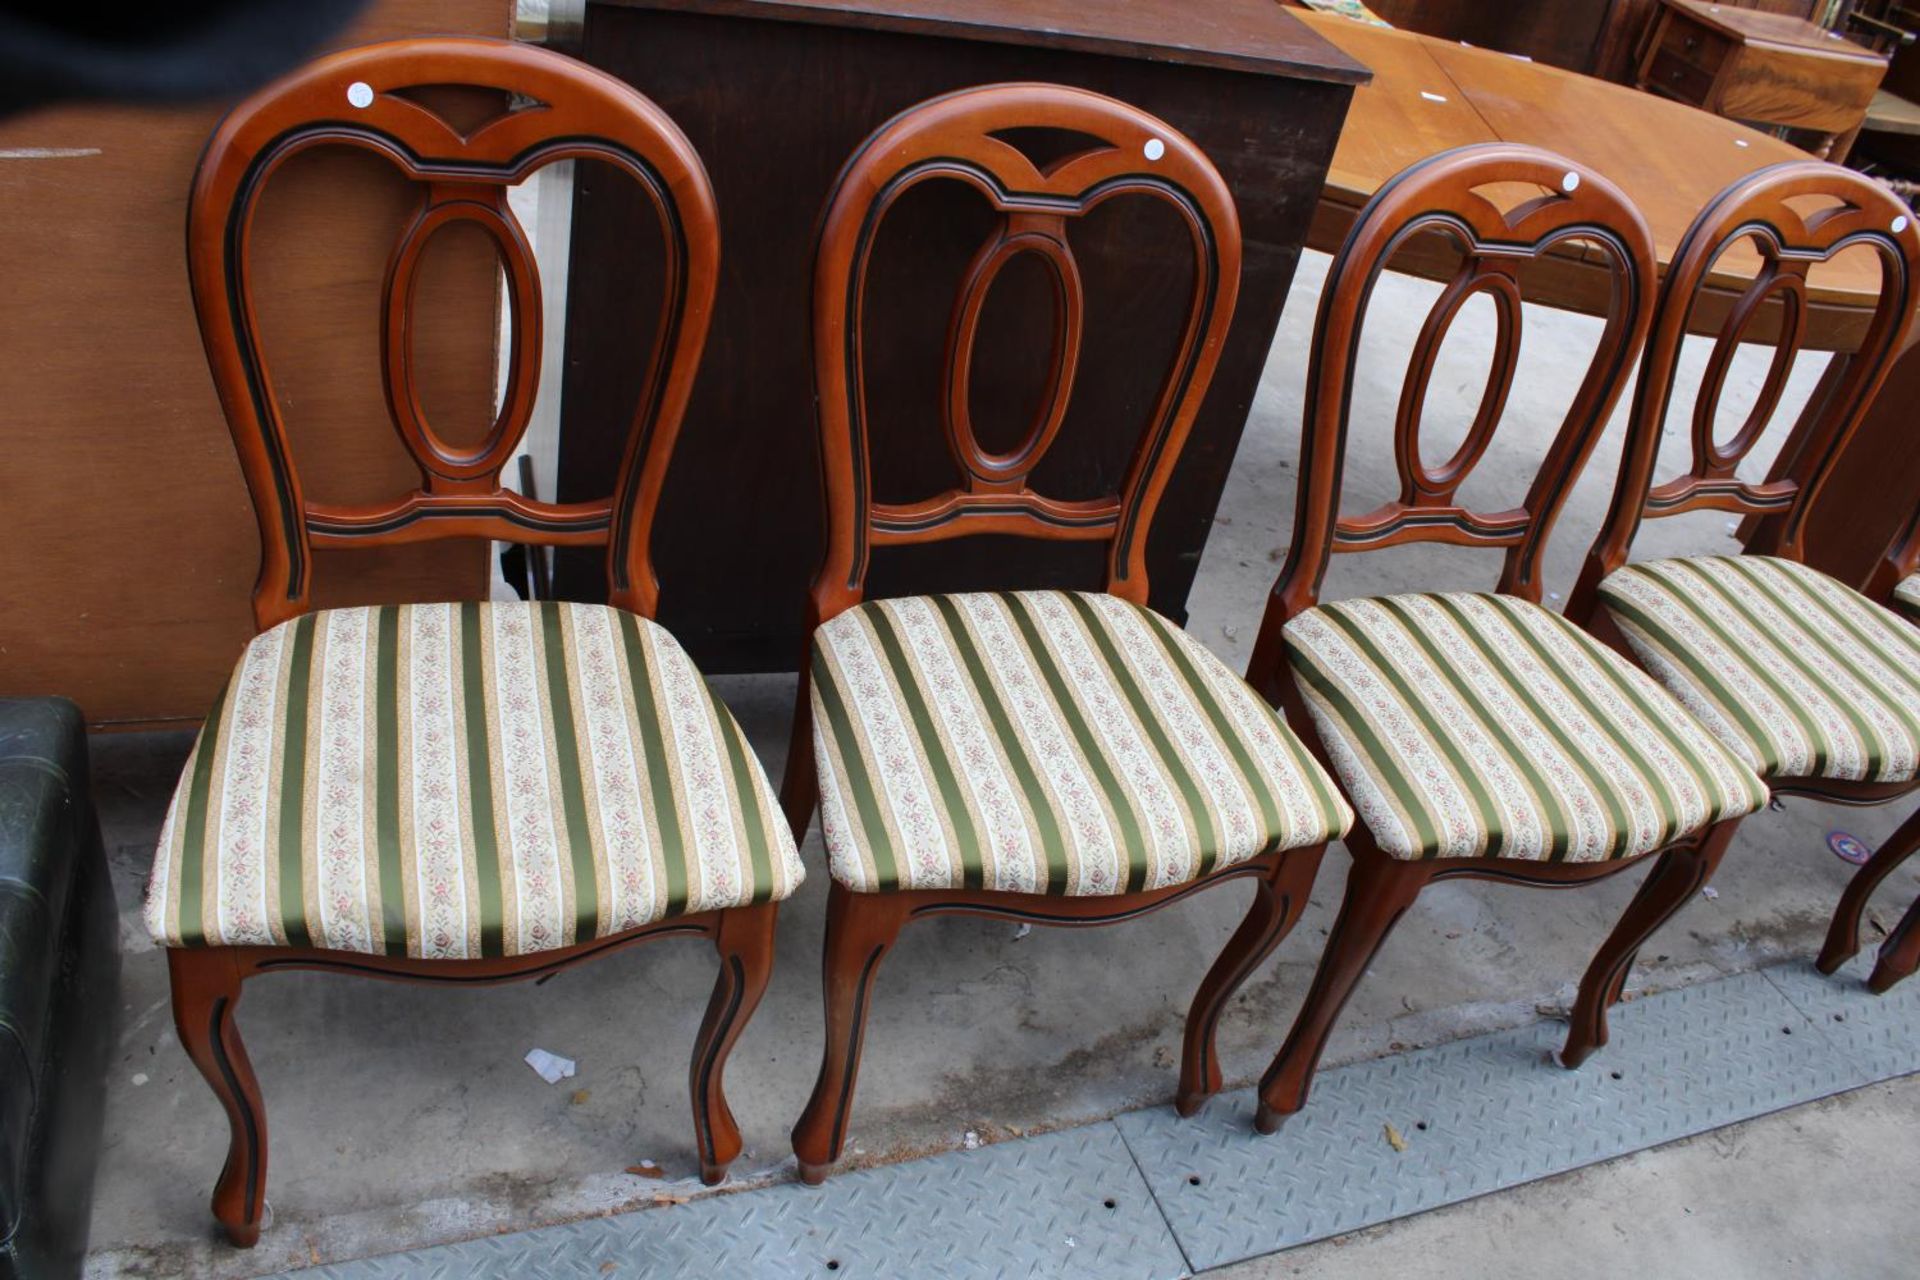 A SET OF SIX VICTORIAN STYLE HARDWOOD DINING CHAIRS - Image 2 of 2